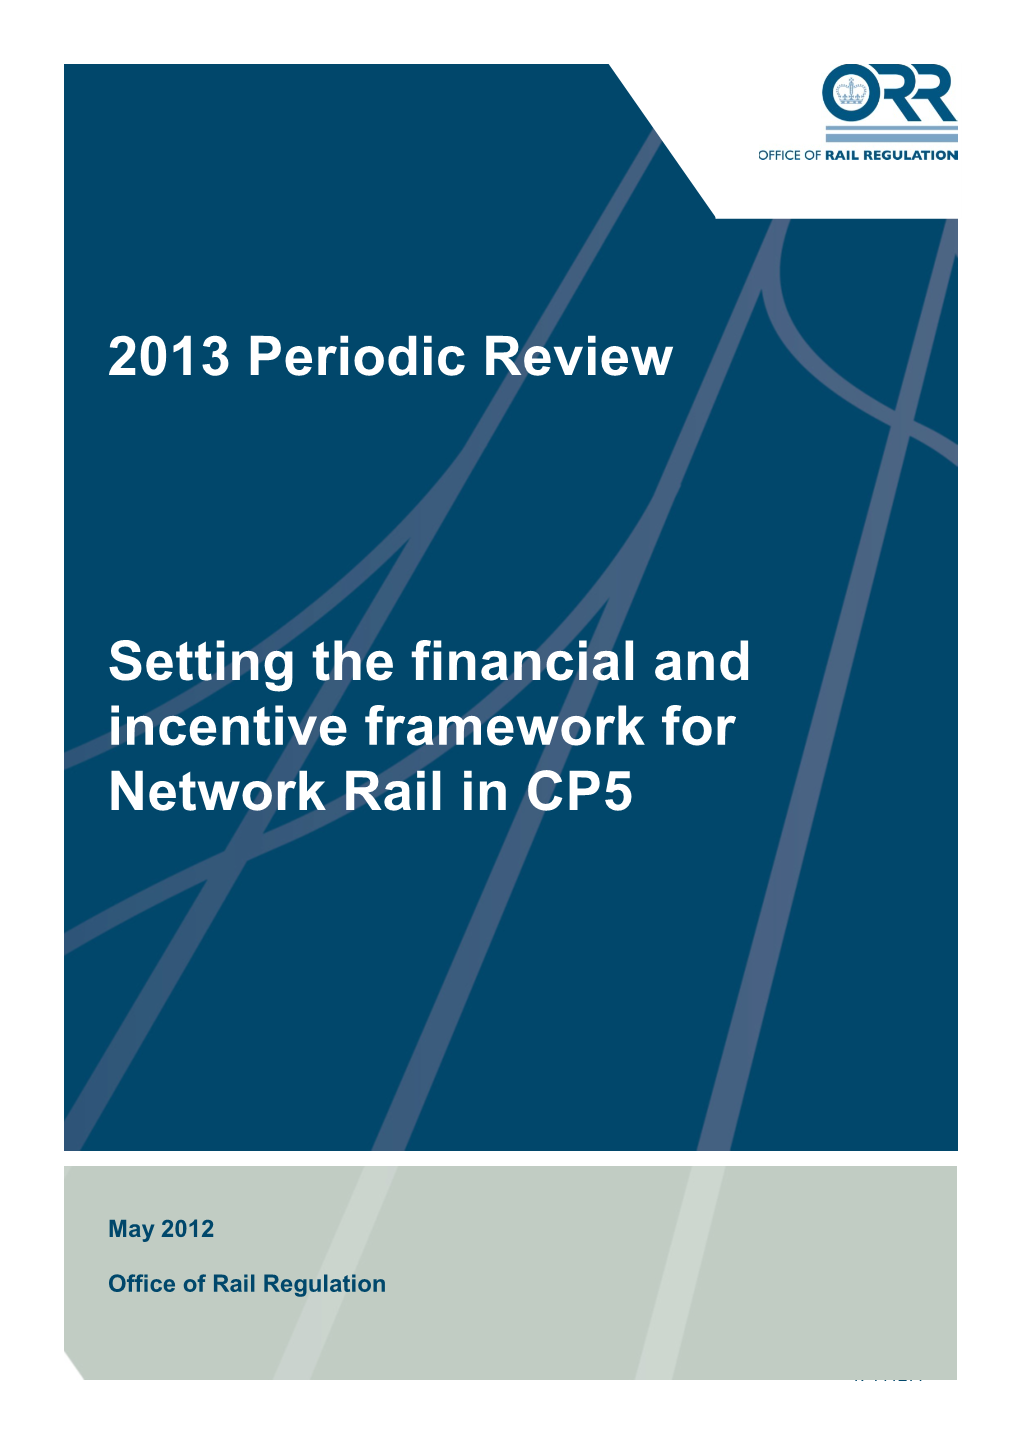 2013 Periodic Review: Setting the Financial and Incentive Framework for Network Rail In